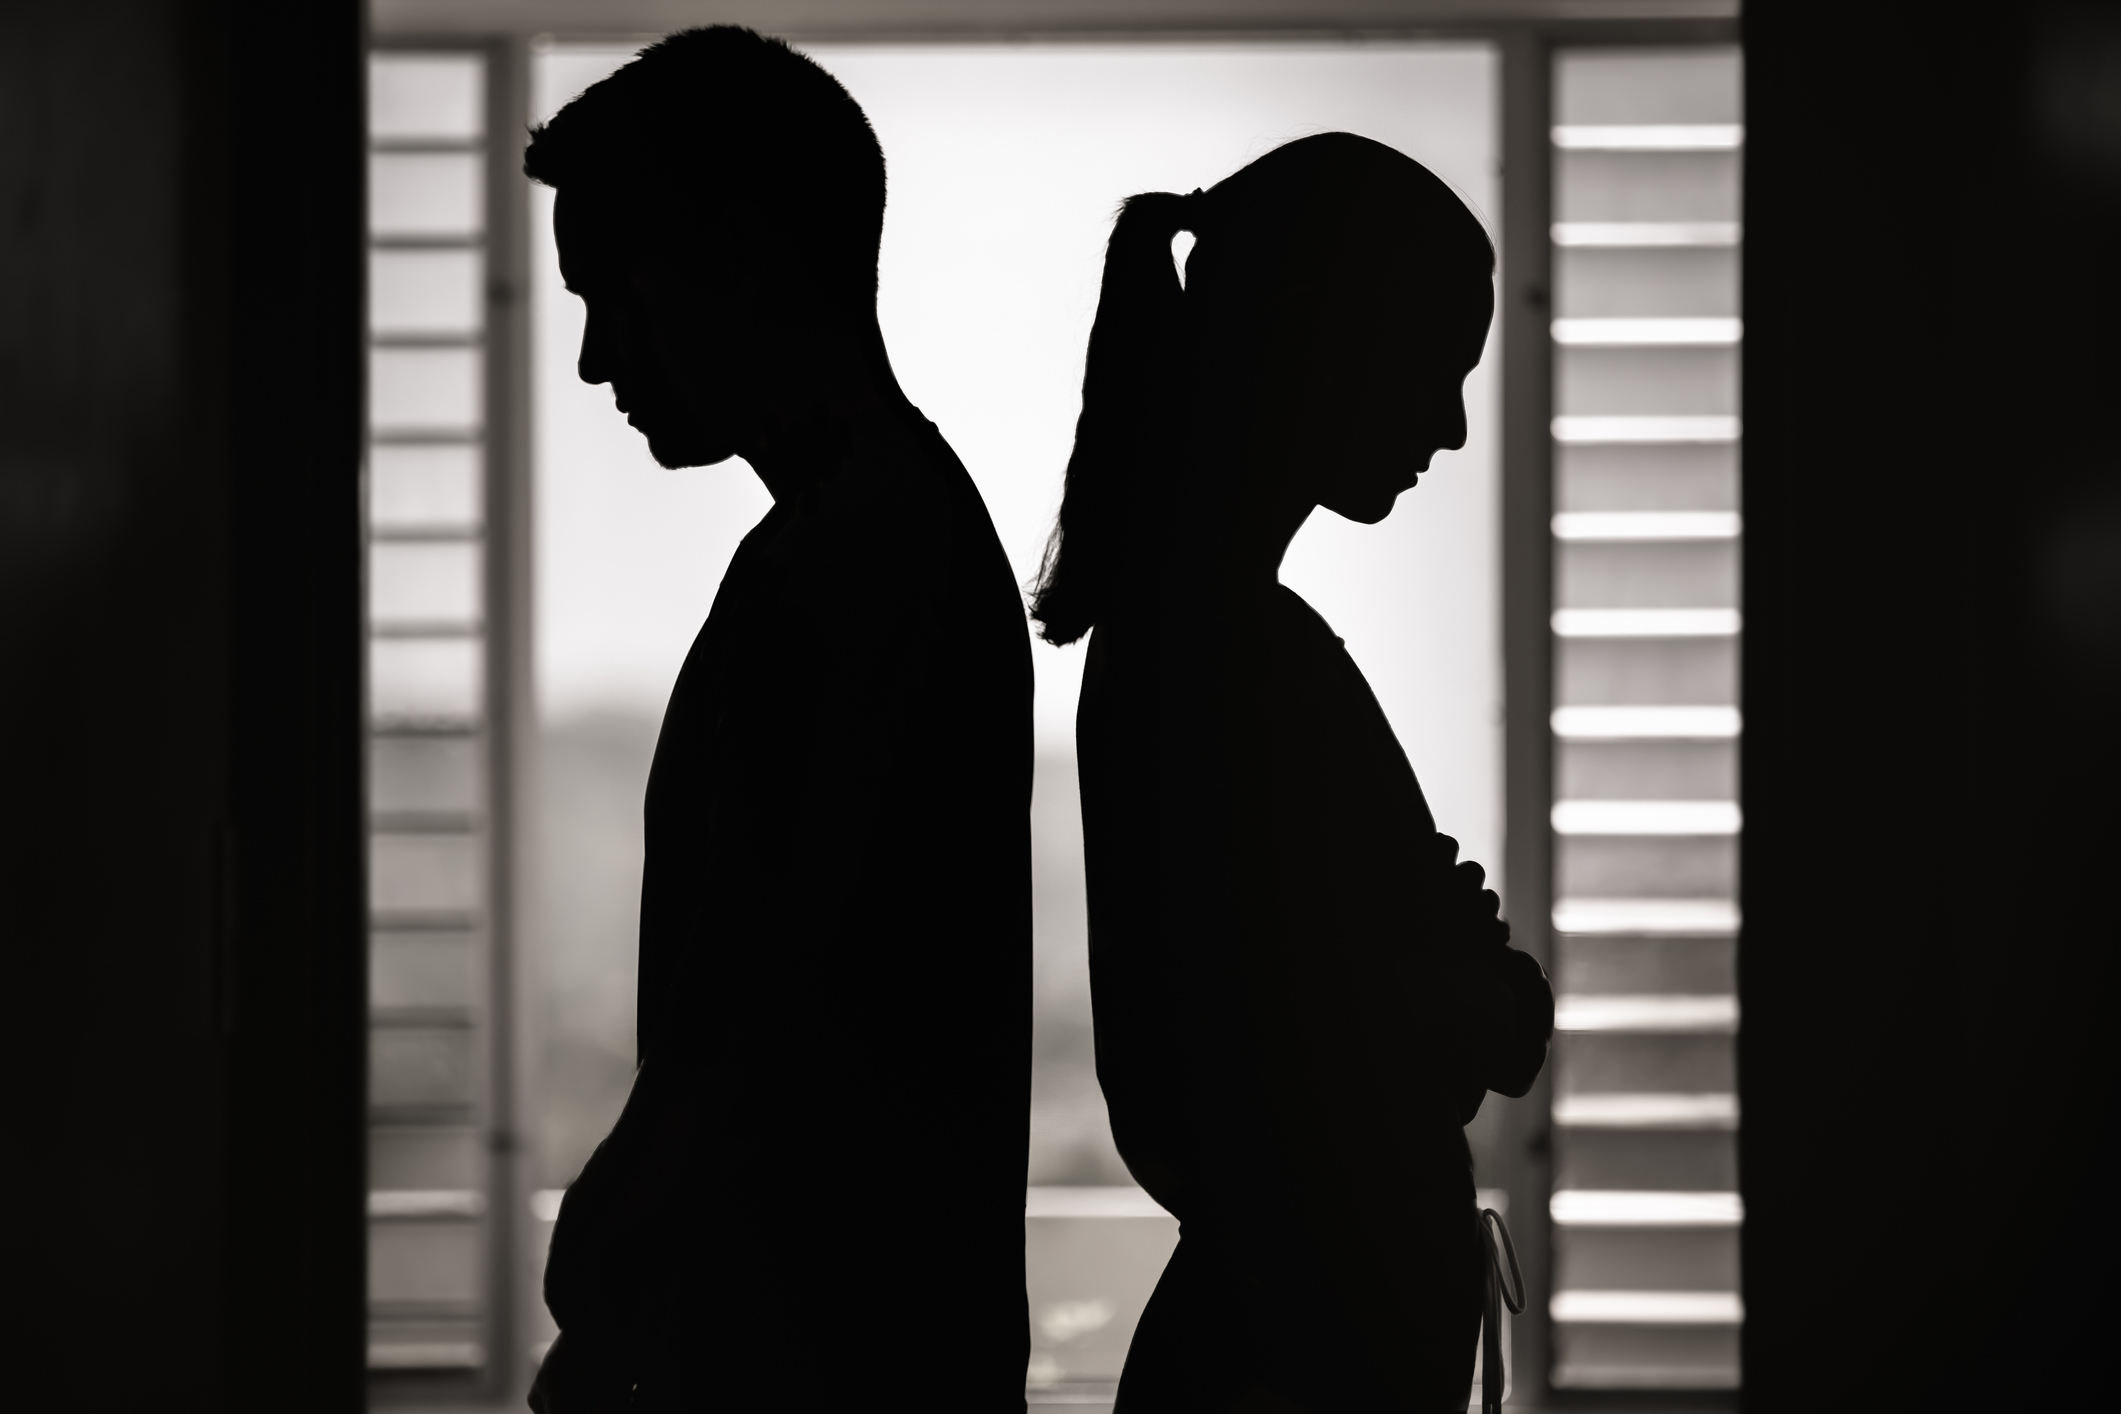 Silhouettes of a man and woman facing away from one another